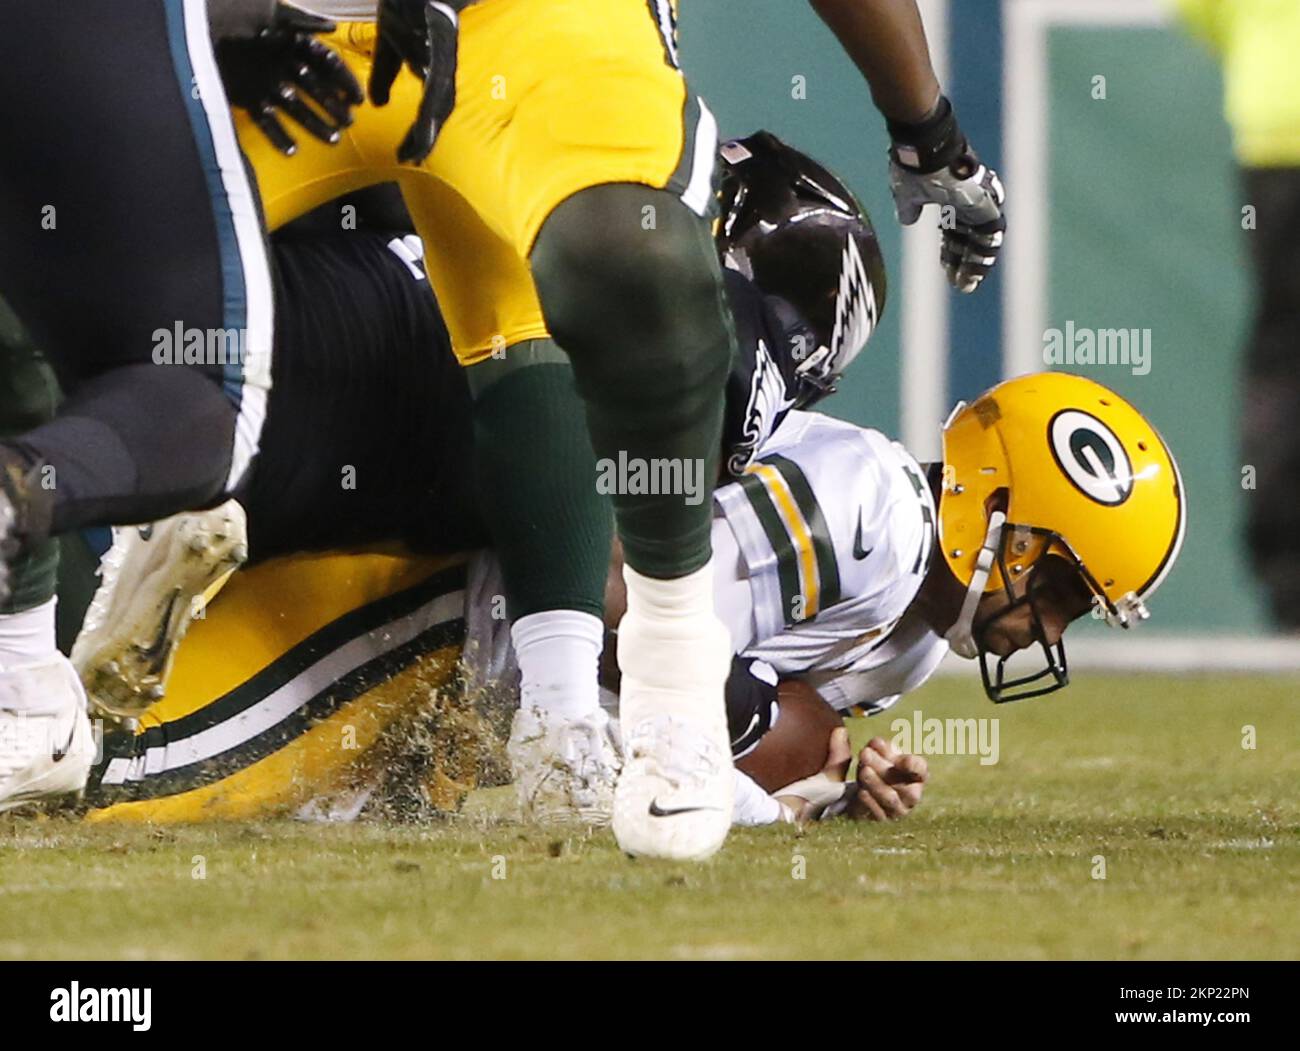 Philadelphia, United States. 27th Nov, 2022. Green Bay Packers Aaron Rodgers is sacked by Philadelphia Eagles Fletcher Cox in the 2nd quarter in week 12 of the NFL season at Lincoln Financial Field in Philadelphia on Sunday, November 27, 2022 Photo by John Angelillo/UPI Credit: UPI/Alamy Live News Stock Photo